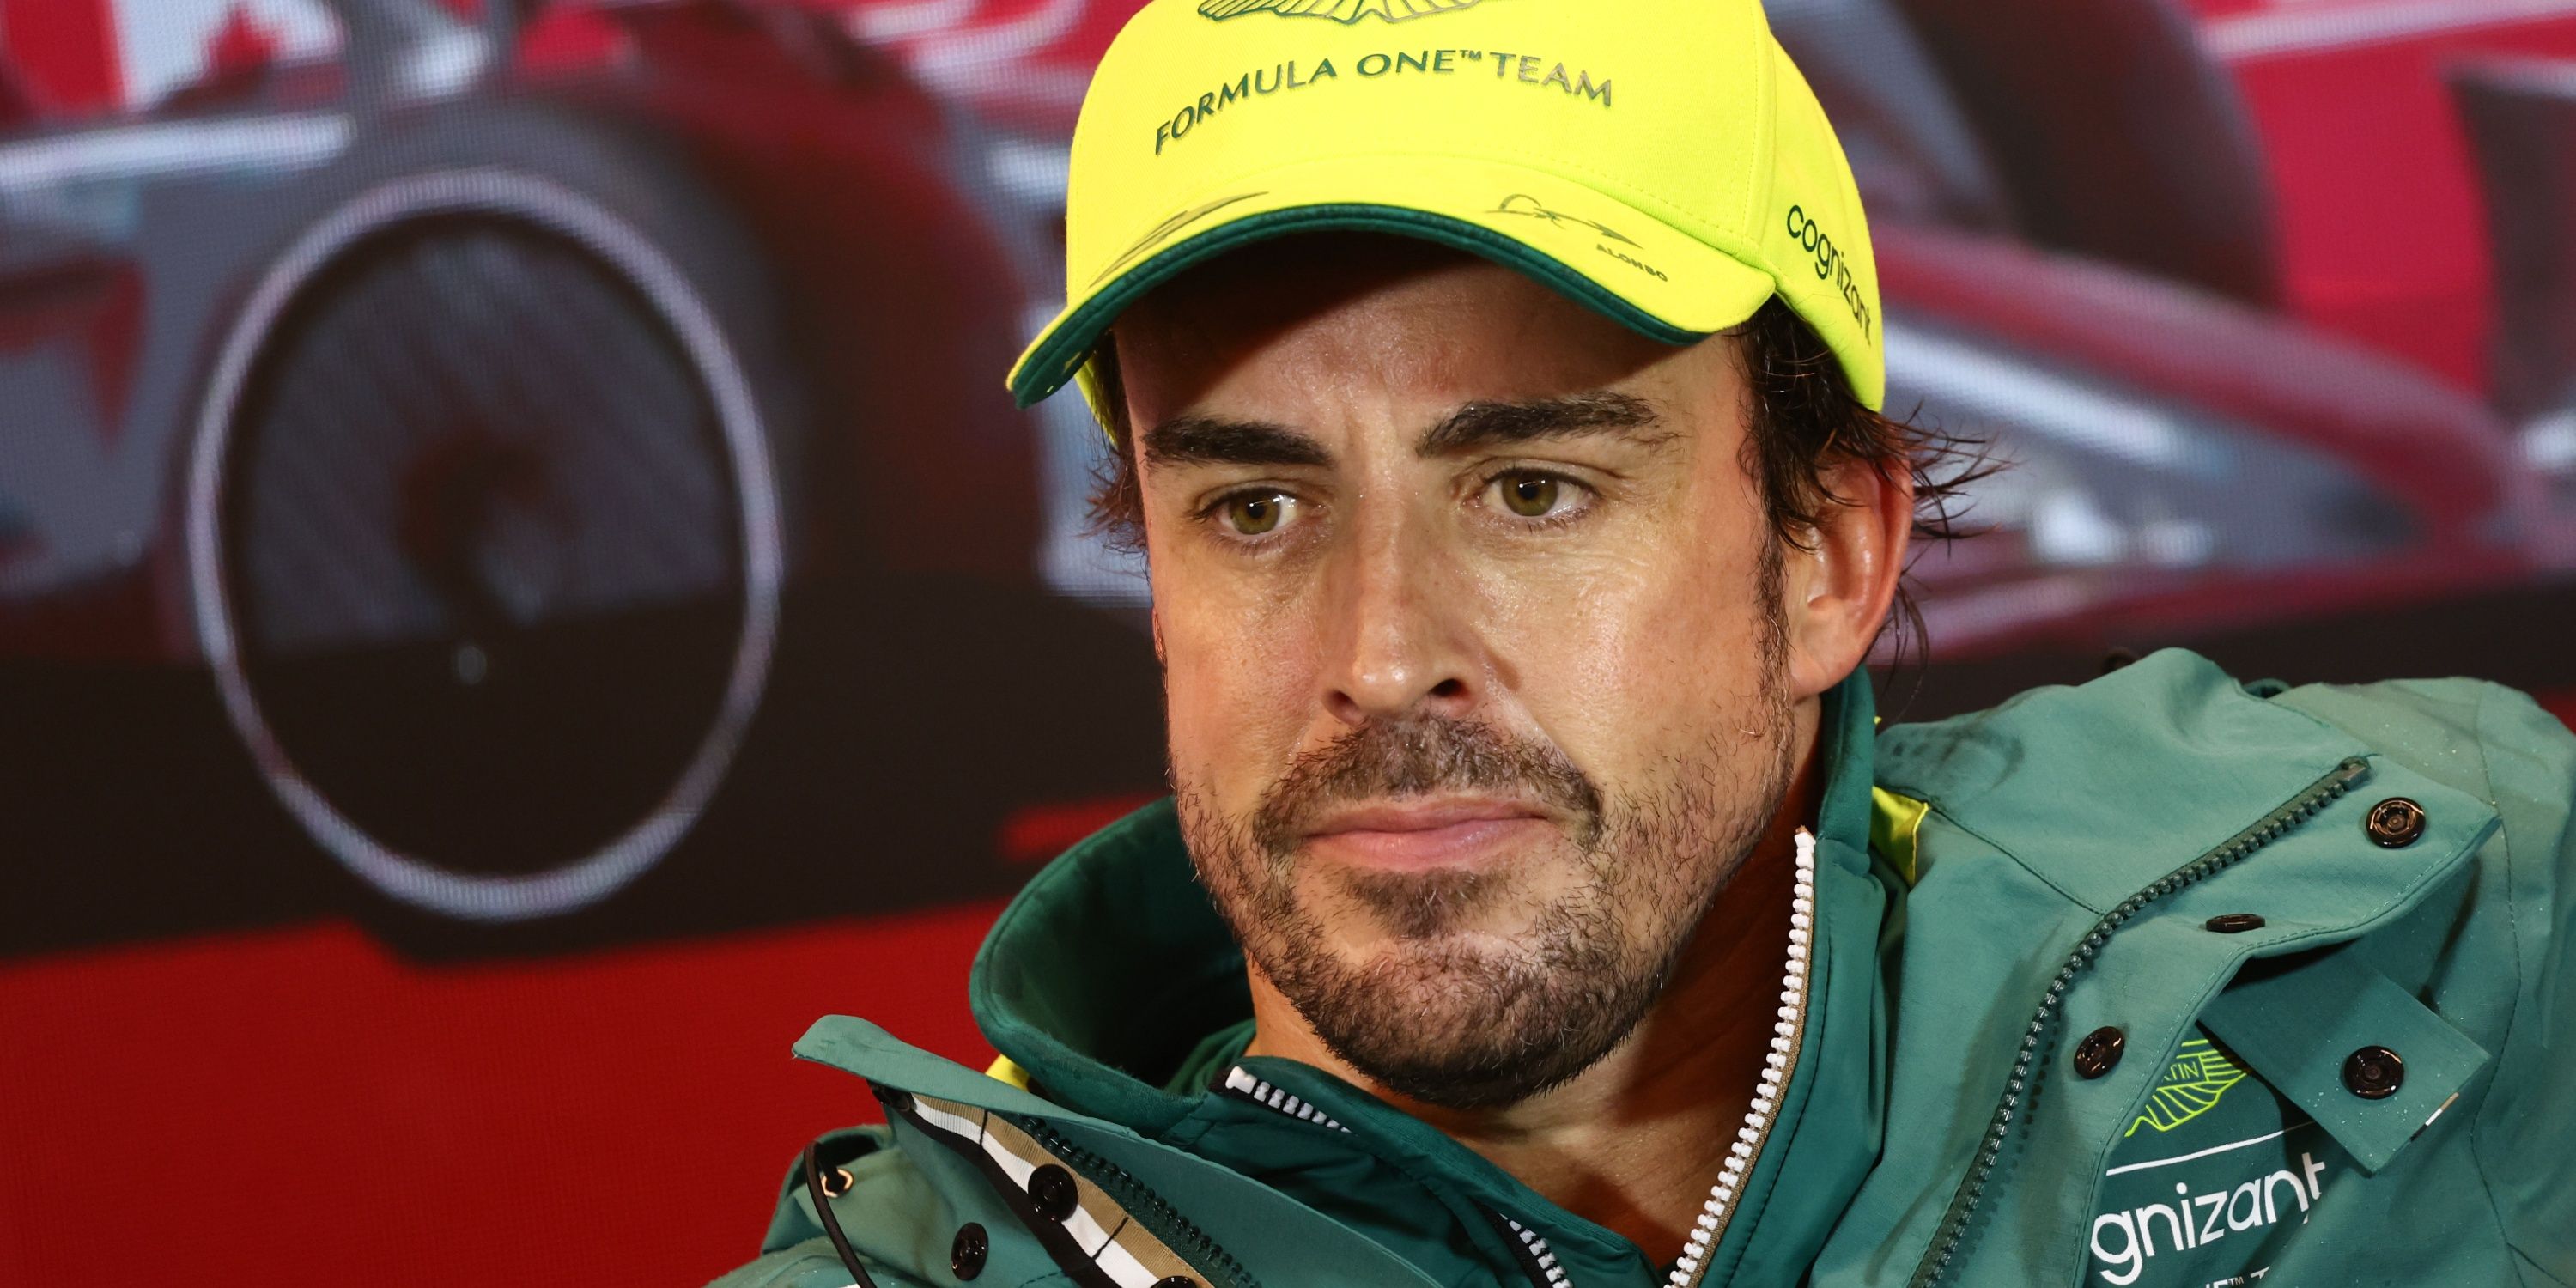 Fernando Alonso in the Canadian GP qualifying press conference